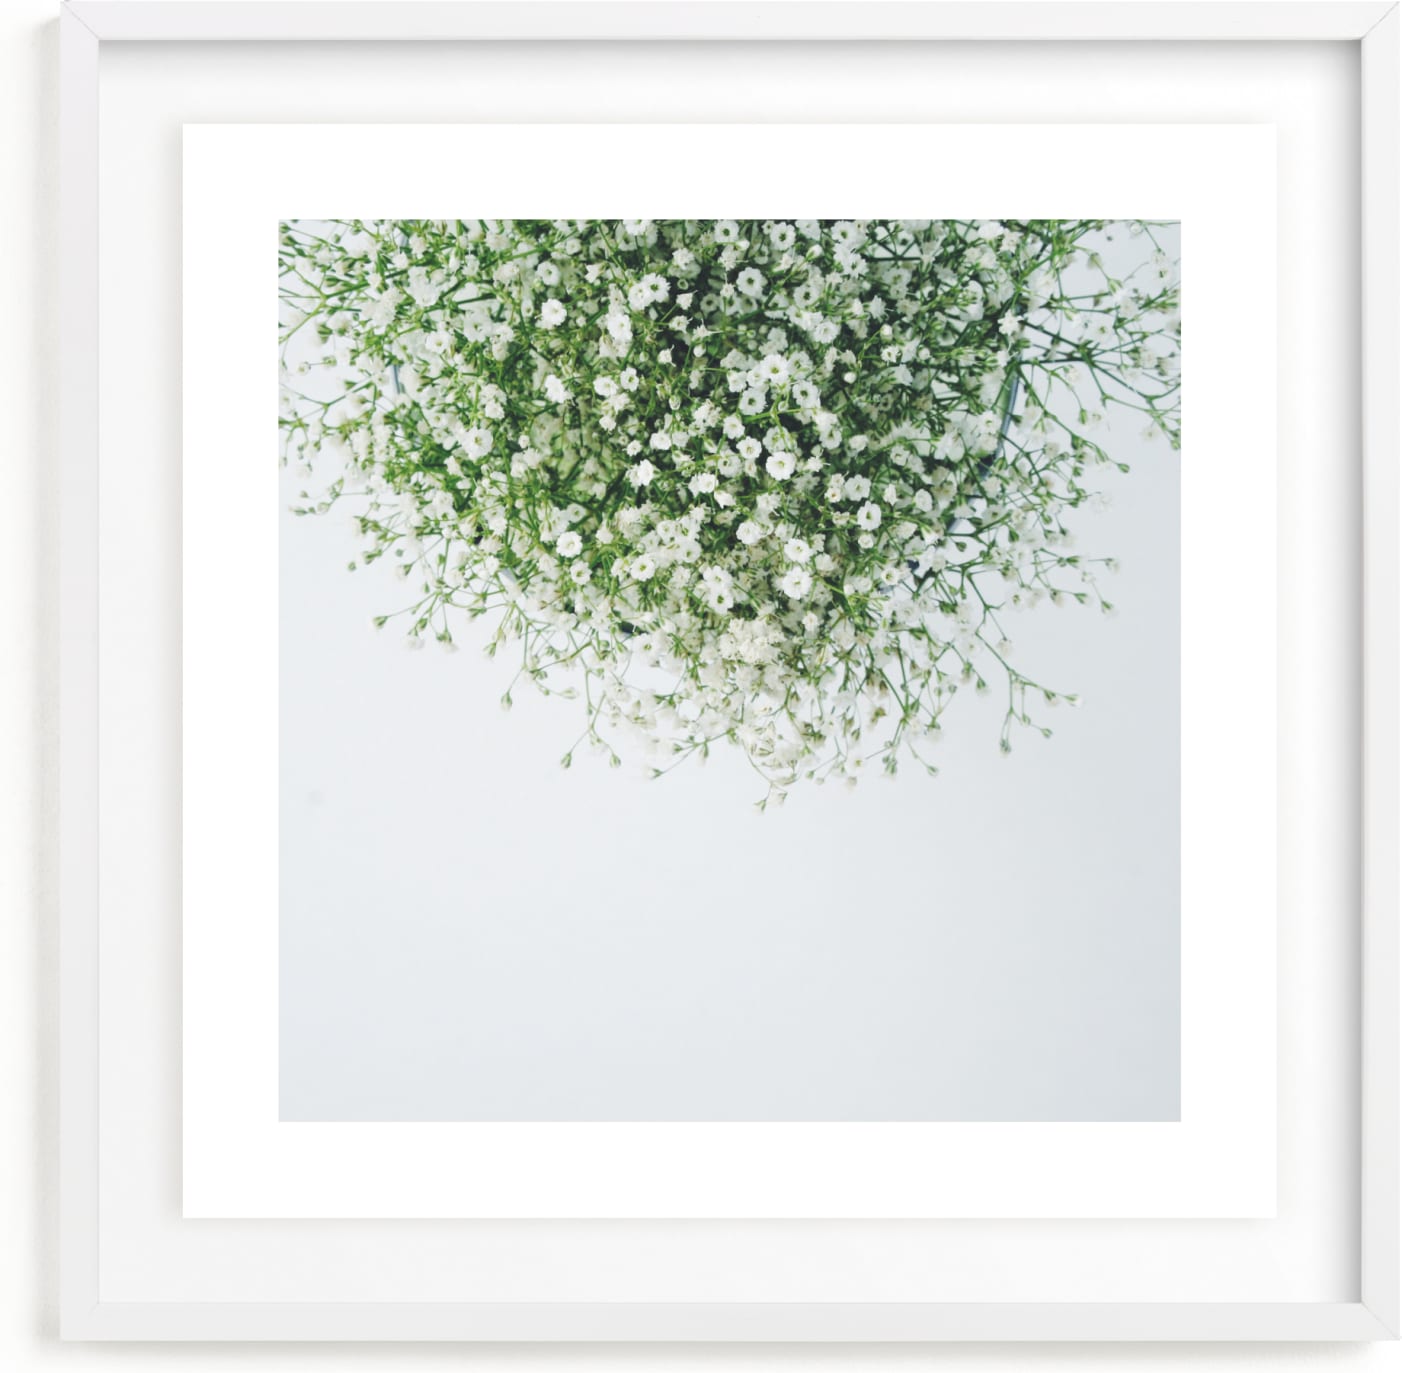 This is a white art by Marabou Design called Gypsophila.